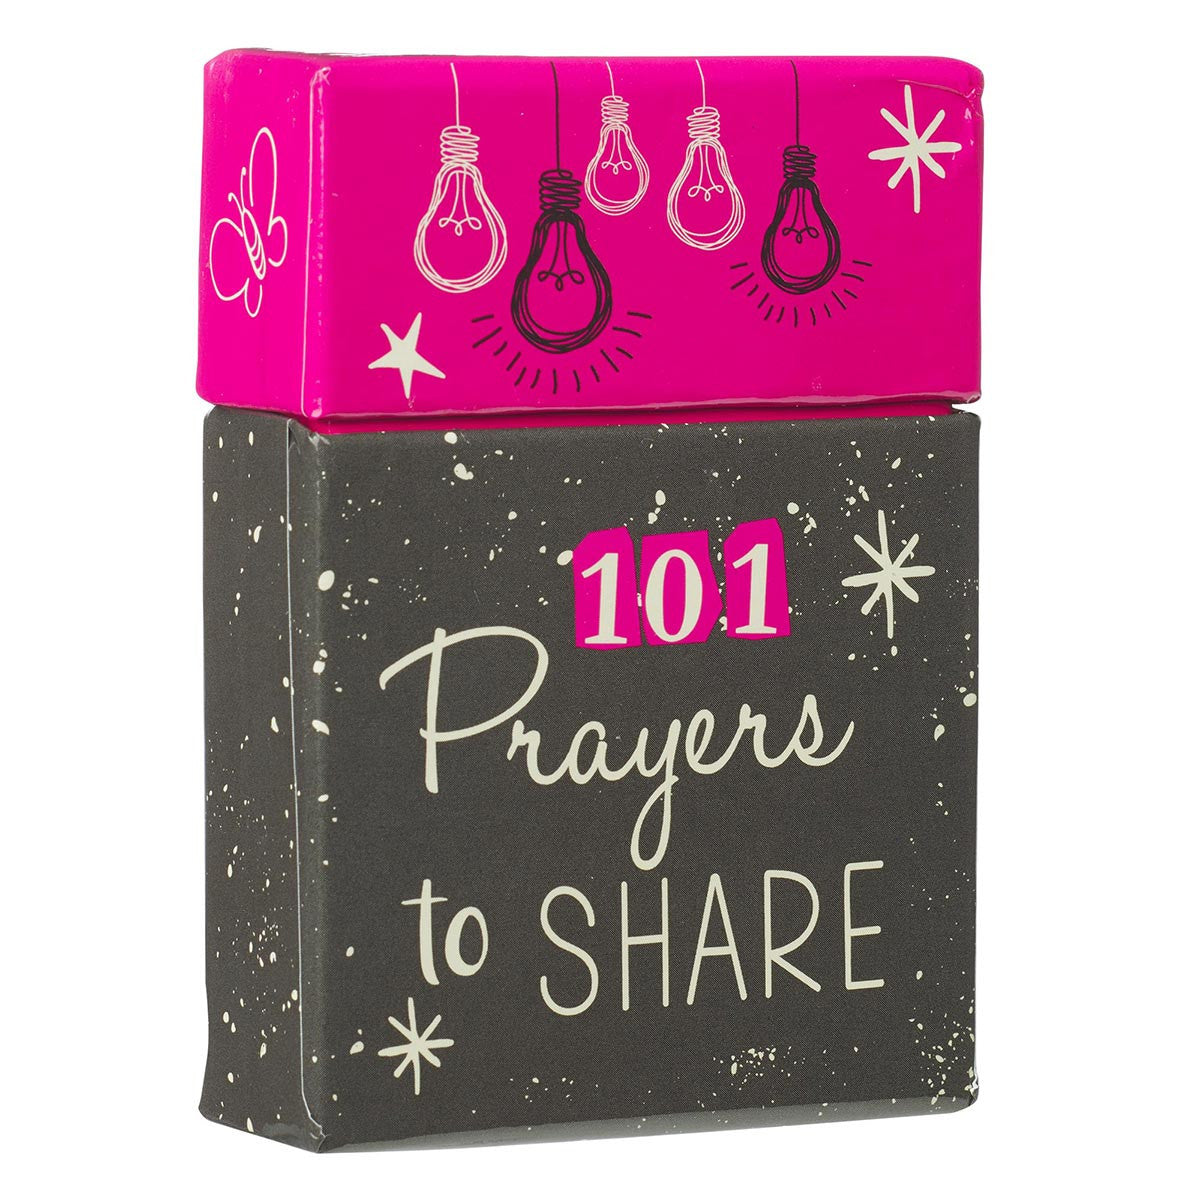 Image of 101 Prayers to Share Box of Blessings other